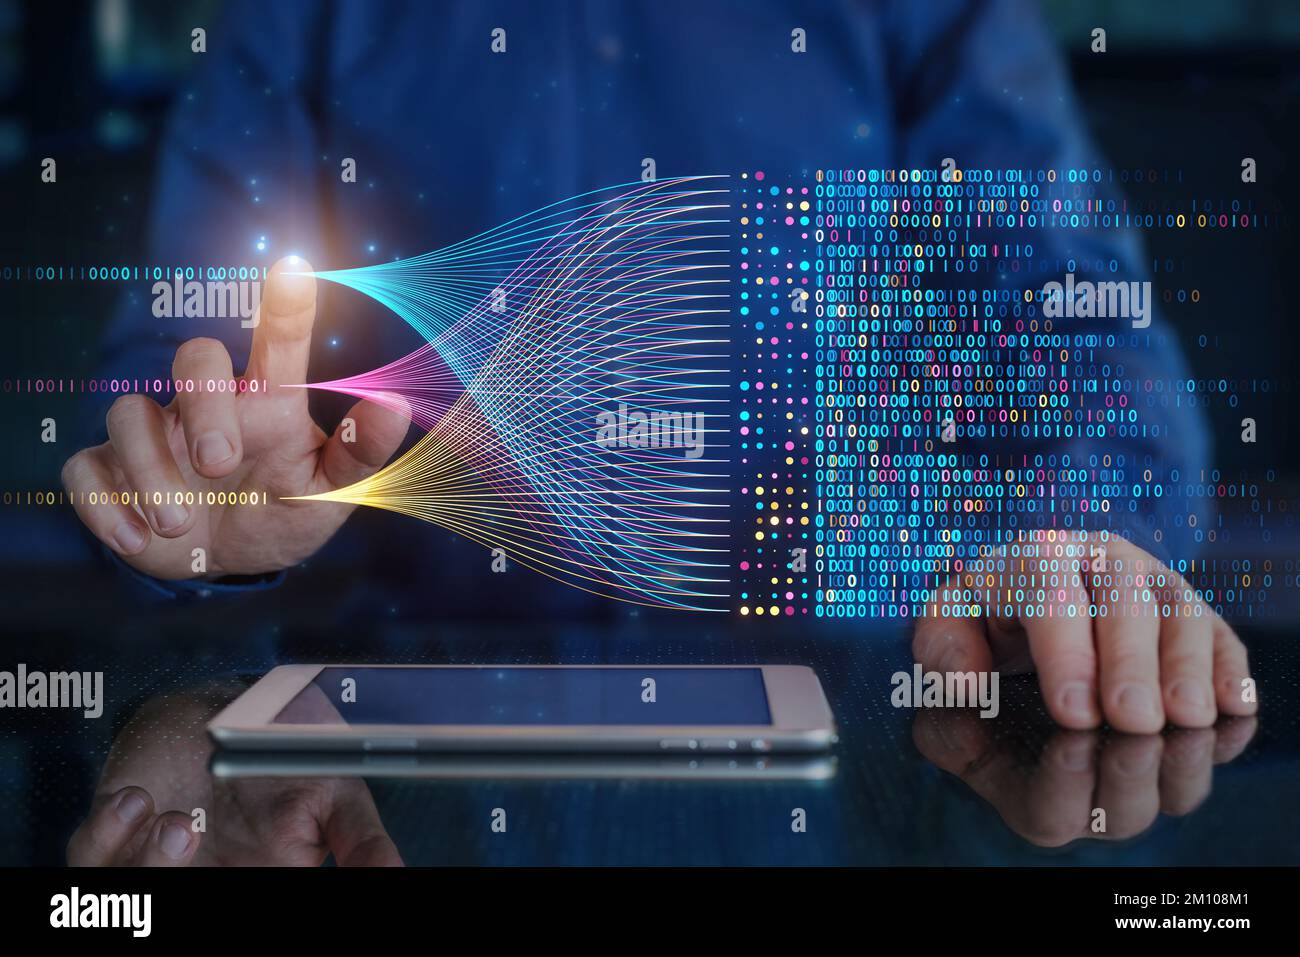 Big data technology and data science. Data scientist querying, analysing and visualizing complex data set on virtual screen. Data flow concept. Busine Stock Photo